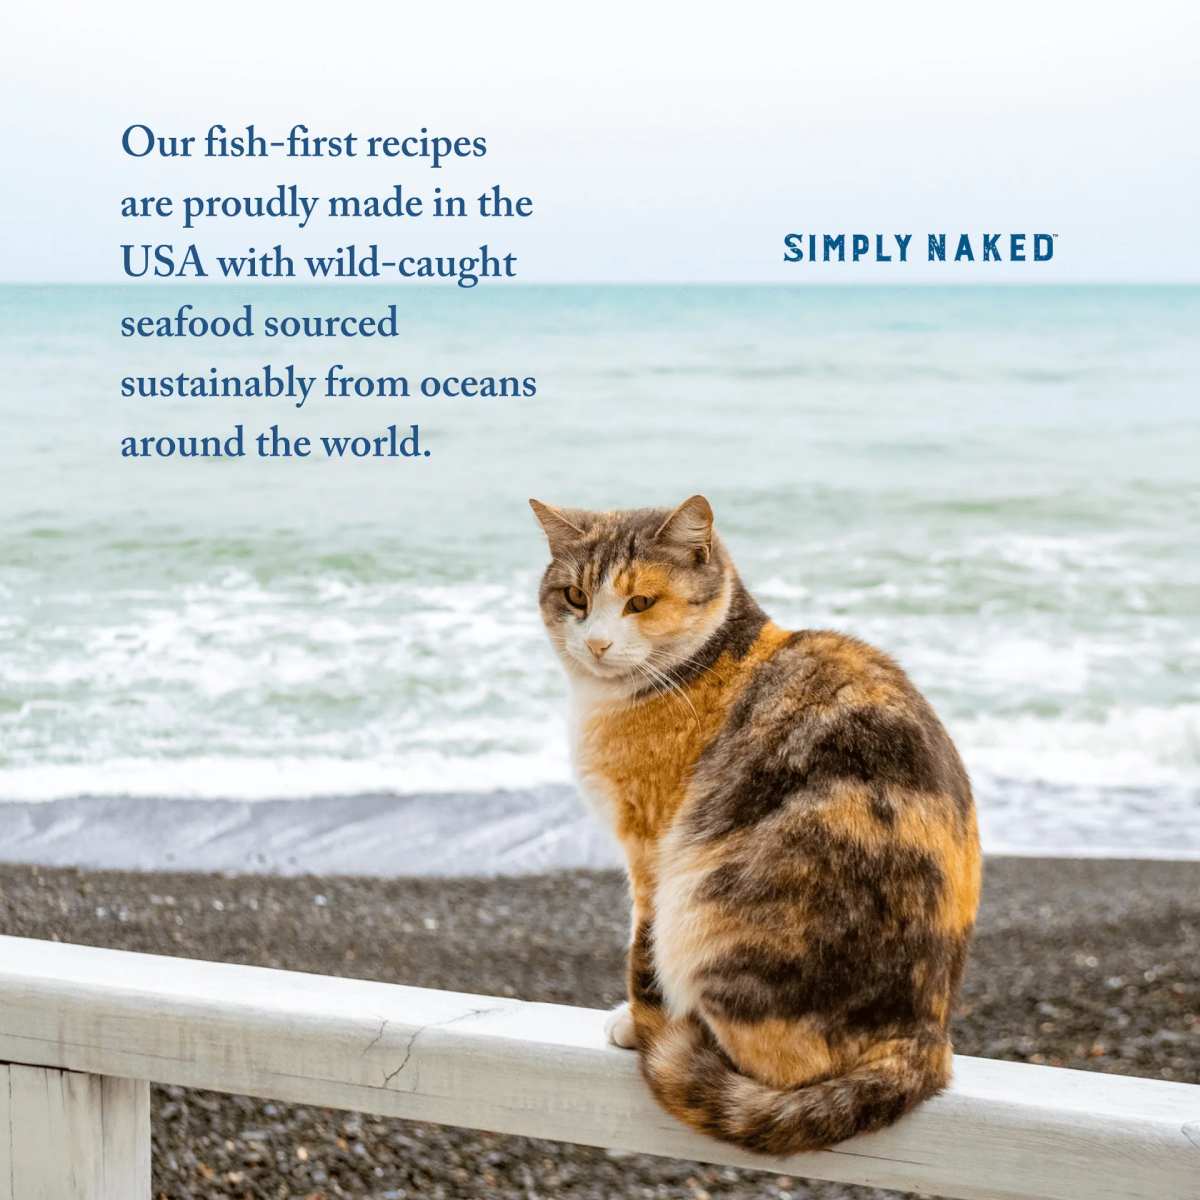 Our recipes are made in the USA with sustainably sourced seafood